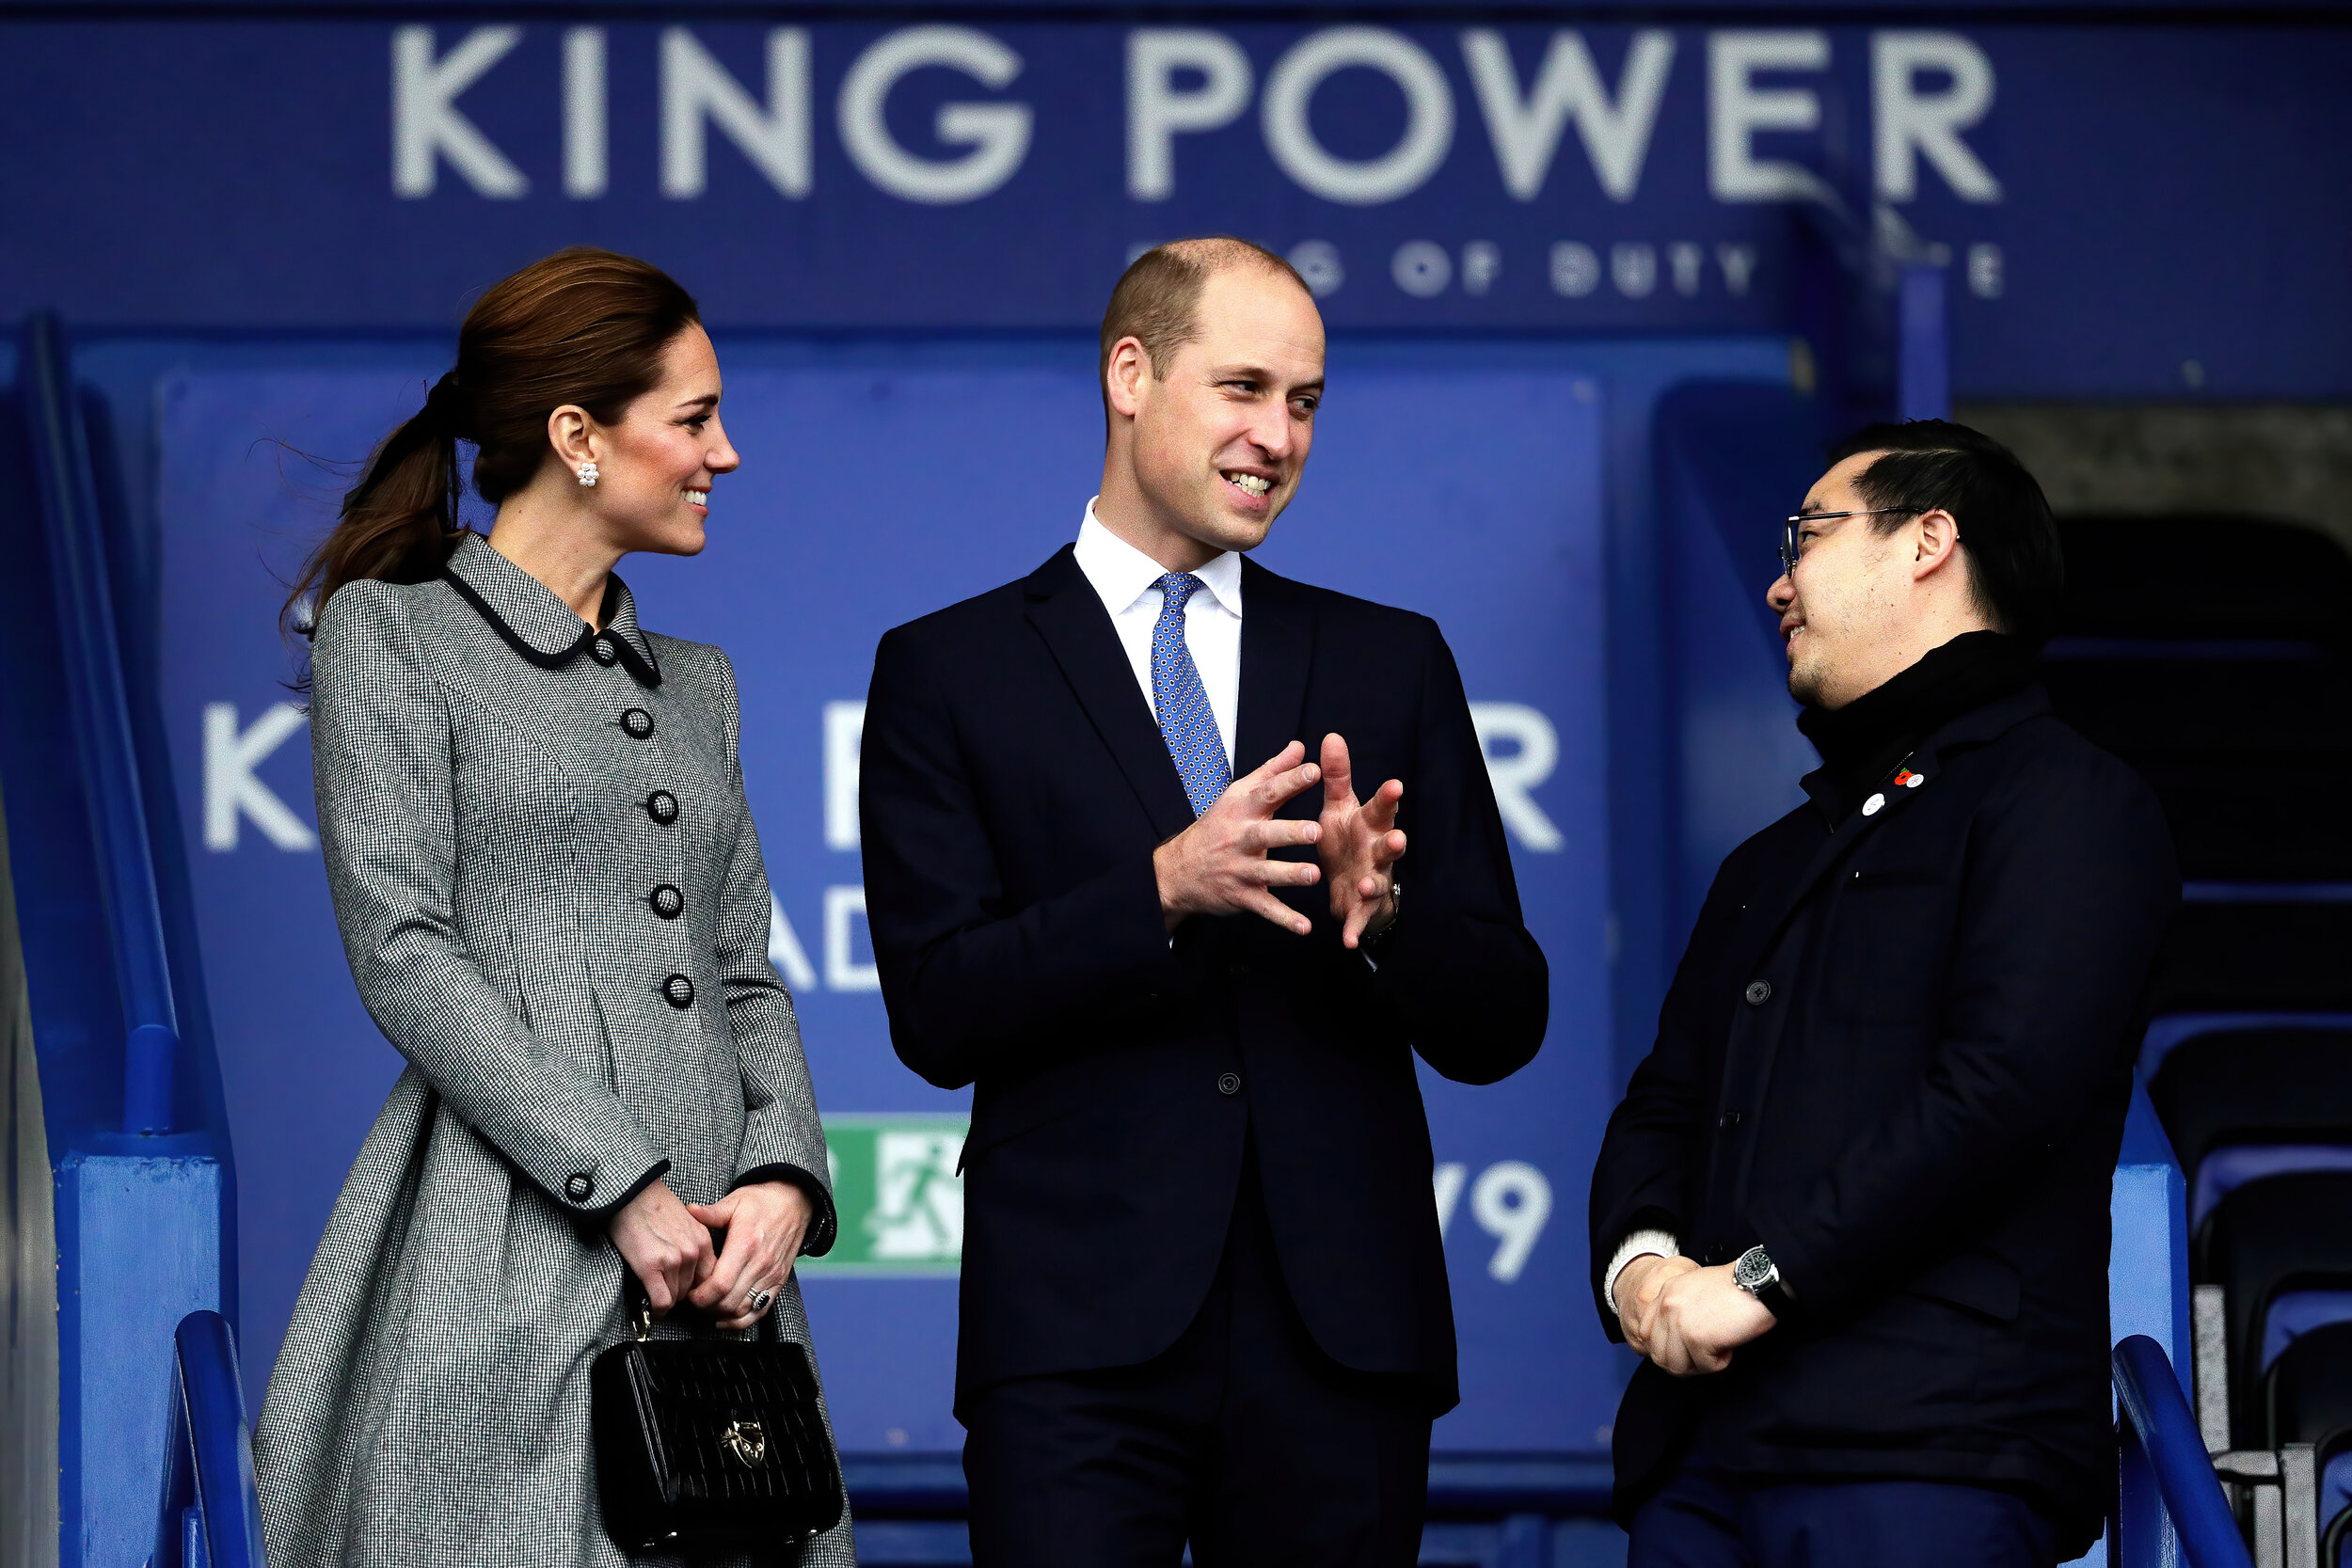  The Duke and Duchess of Cambridge speak with Aiyawatt Srivaddhanaprabha as they view the pitch from the stands at Leicester City Football ClubÕs King Power Stadium, during a visit to Leicester to pay tribute to those who were killed in the helicopte